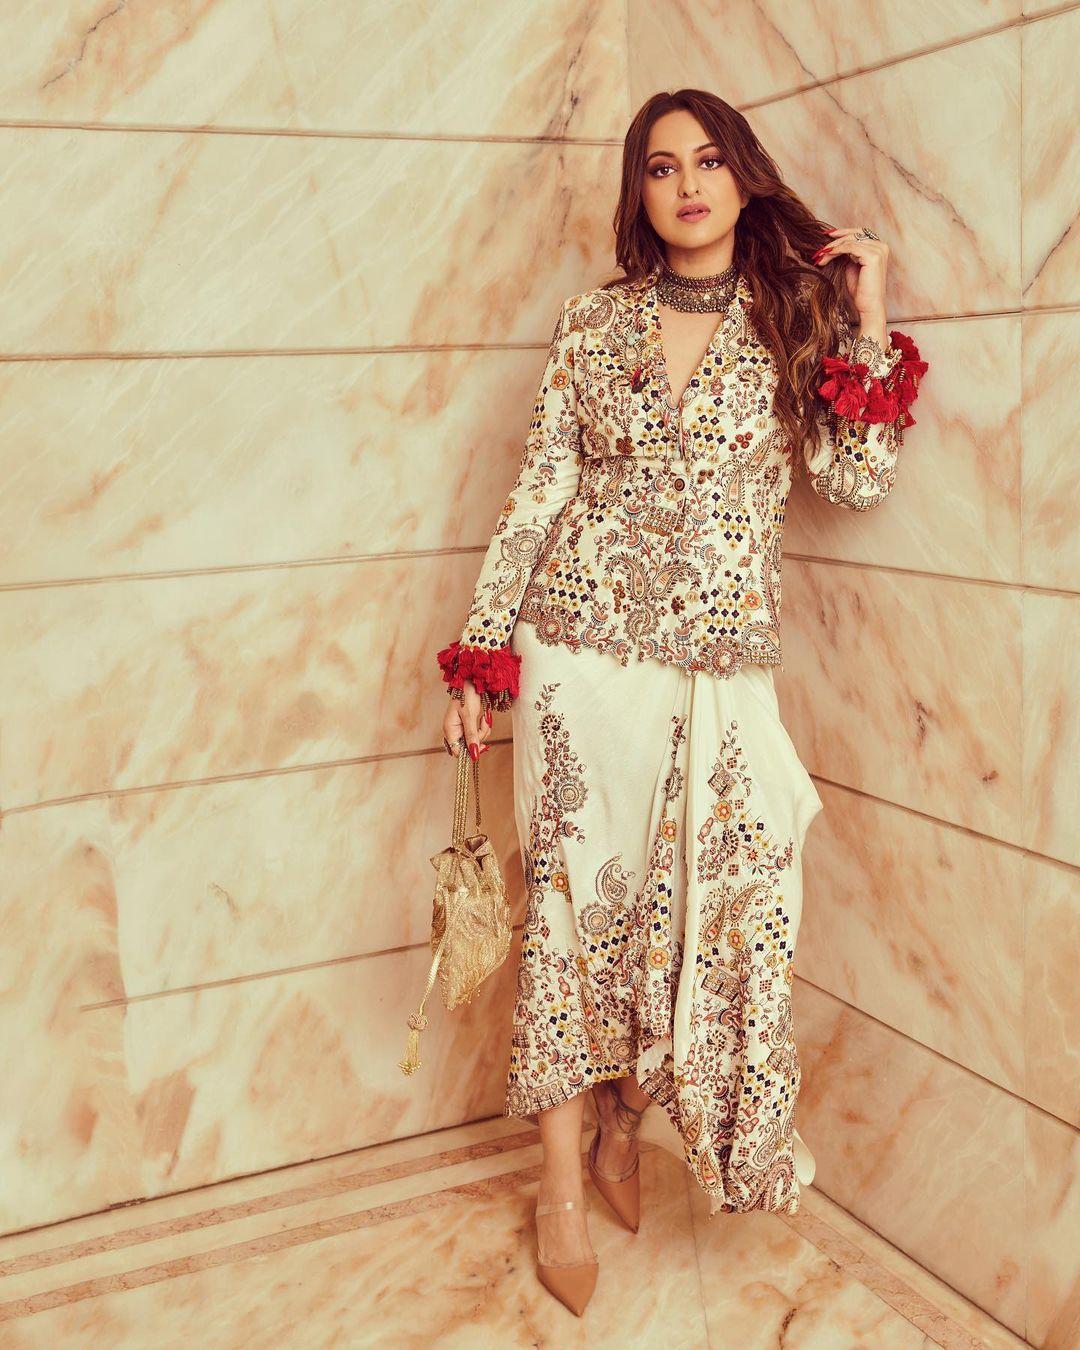 In this look, Sonakshi Sinha wore a stunning white heavily embroidered outfit, perfect for an Indo-western look